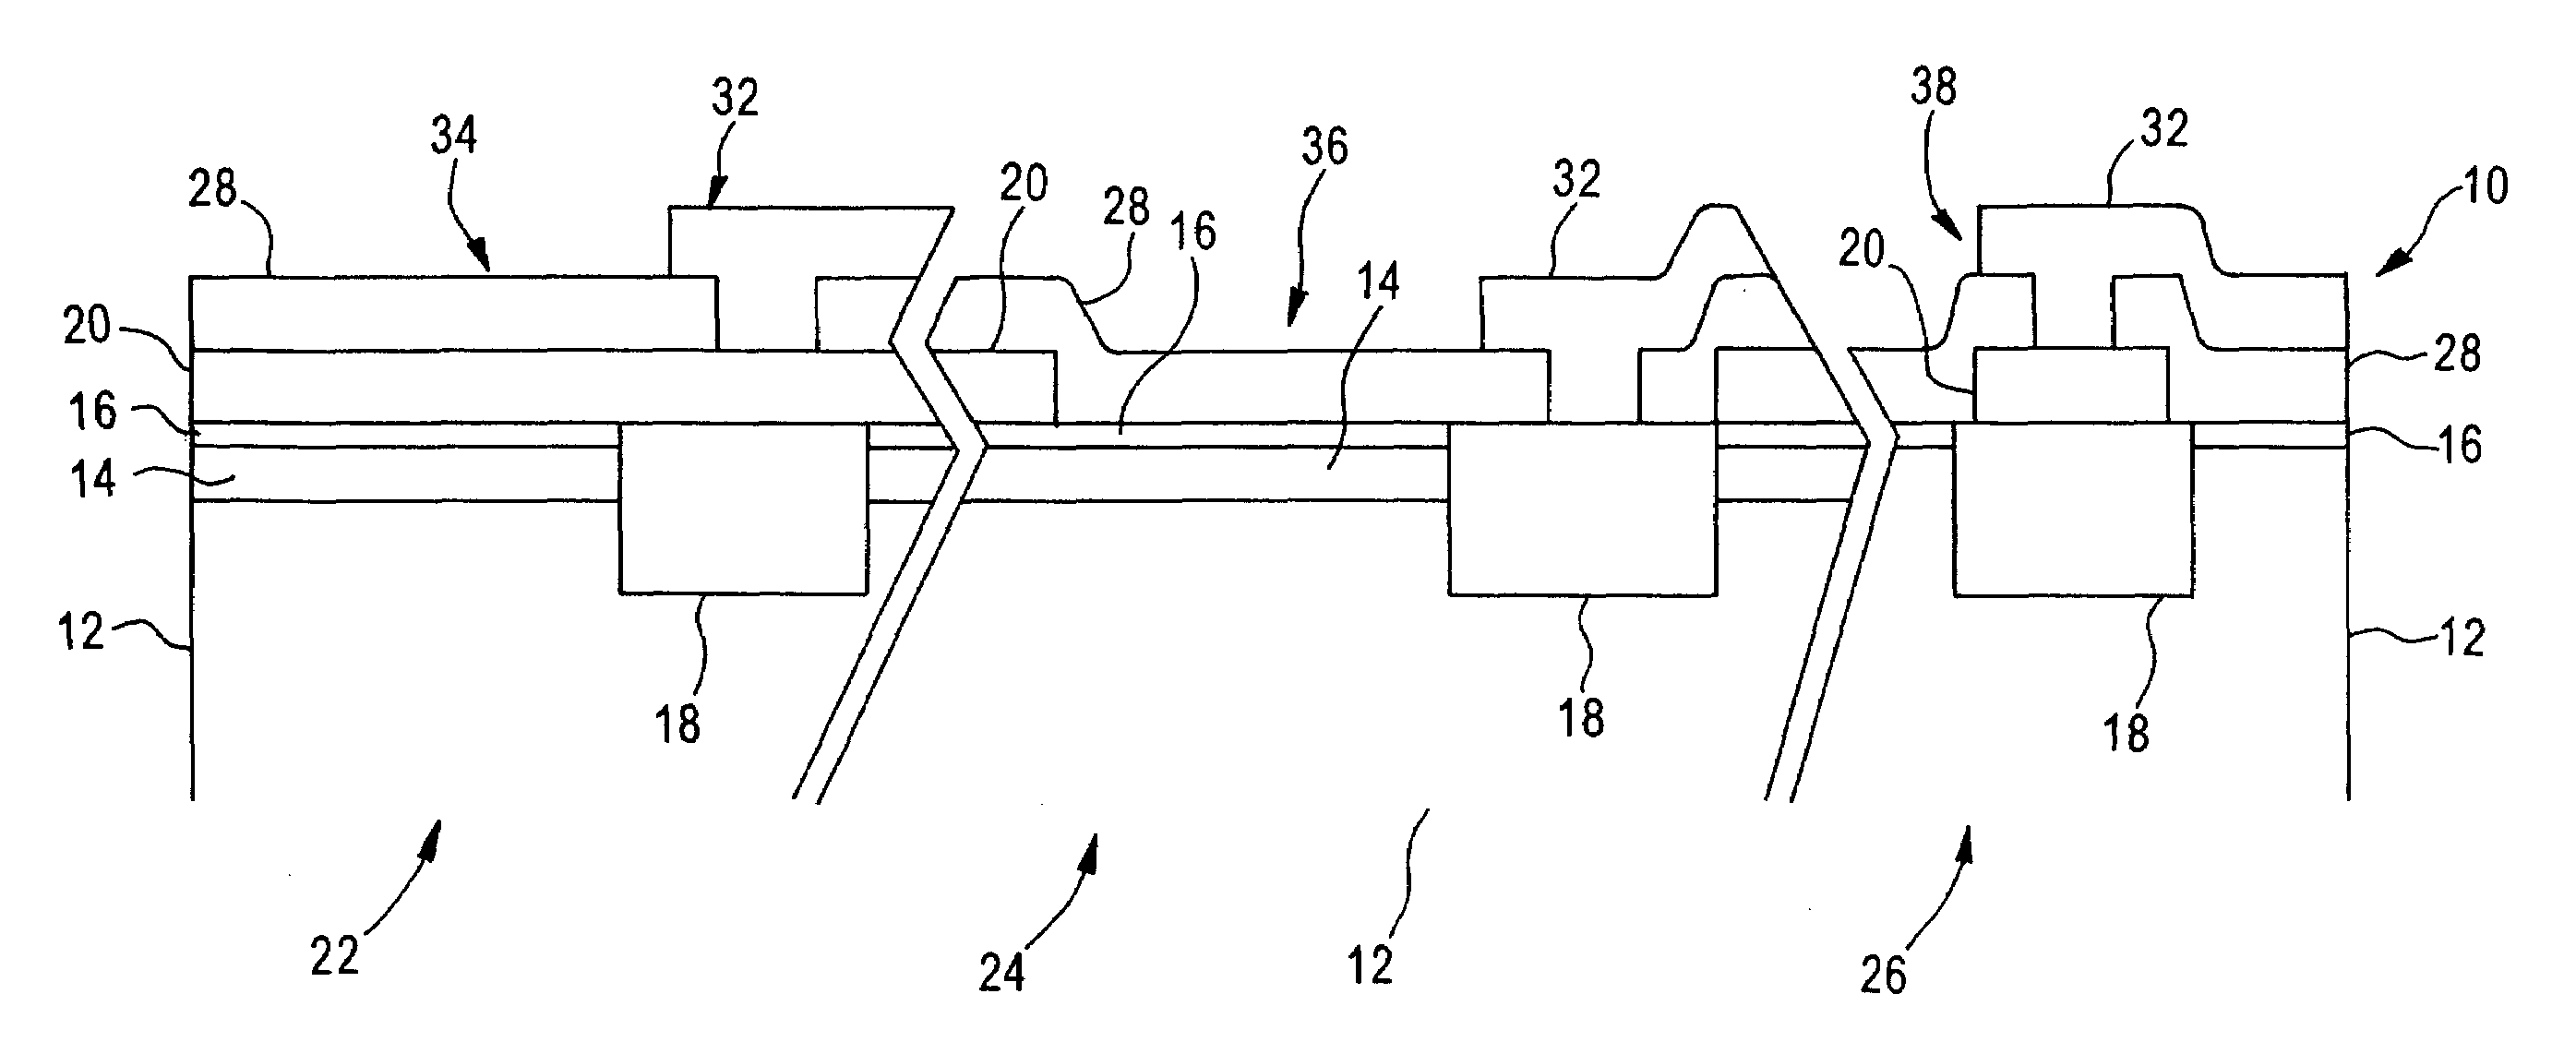 Array of gate dielectric structures to measure gate dielectric thickness and parasitic capacitance